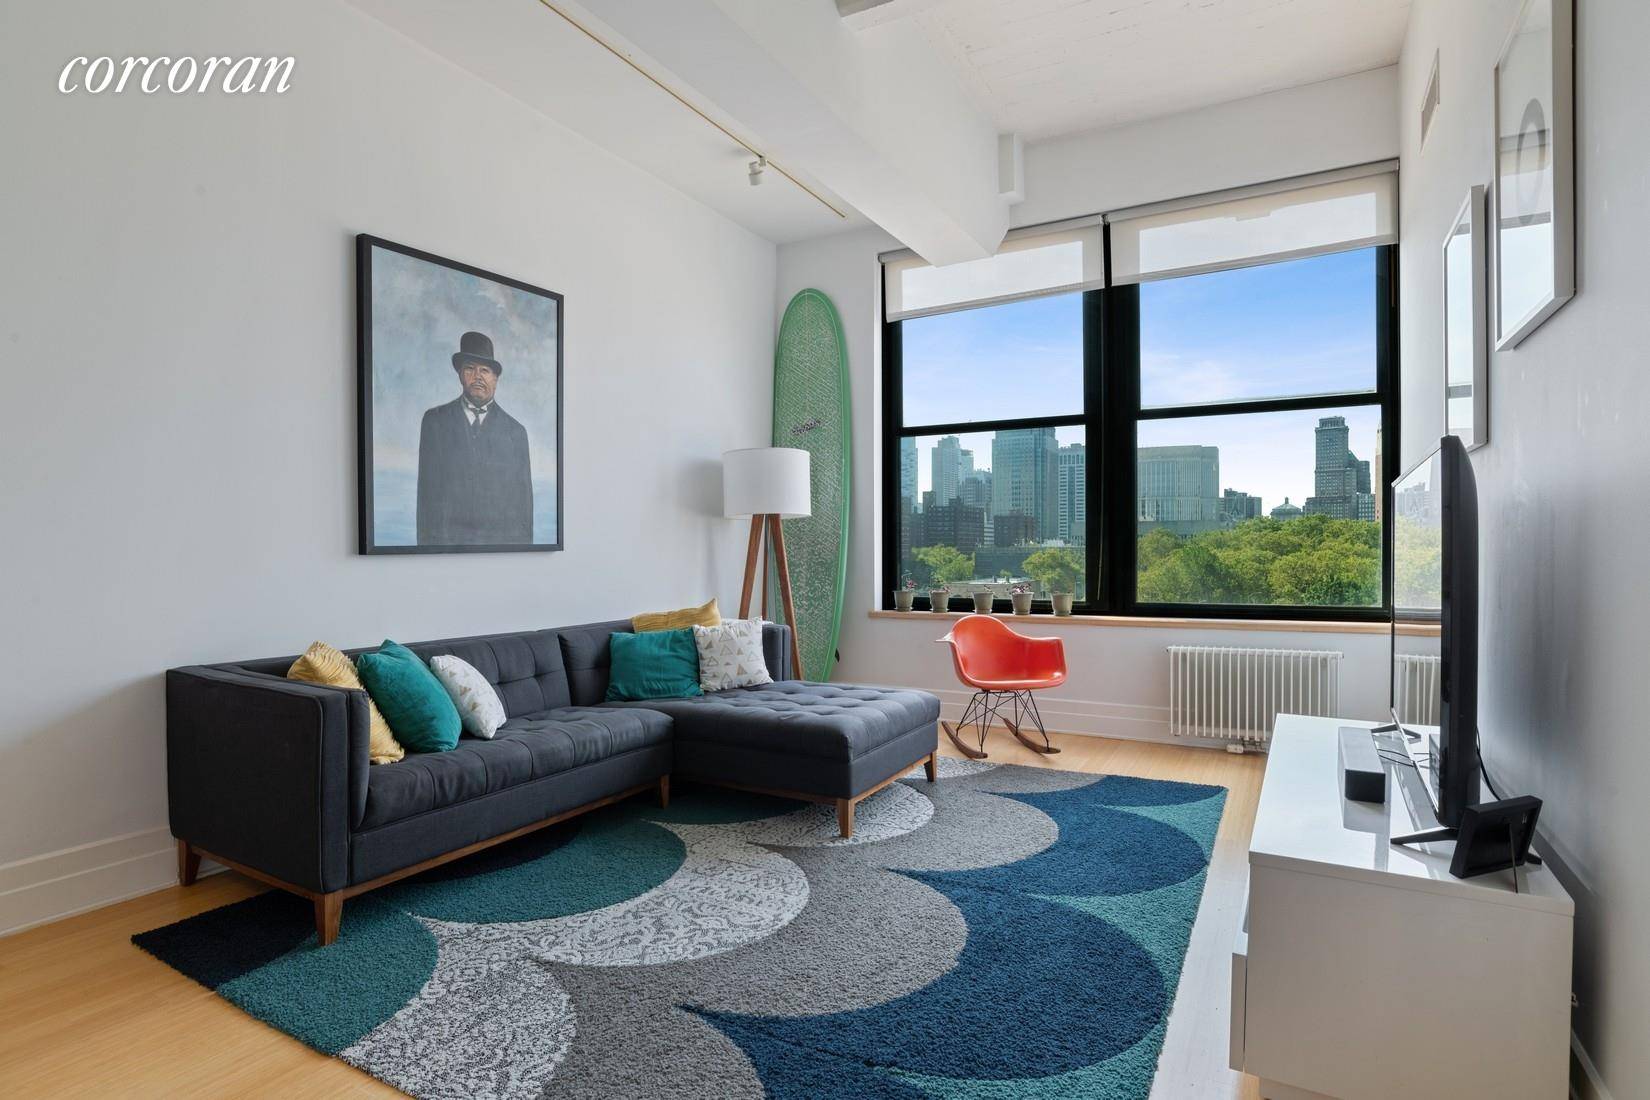 Authentic one bedroom loft offered for lease in one of DUMBO's most coveted condos, 70 Washington Street.